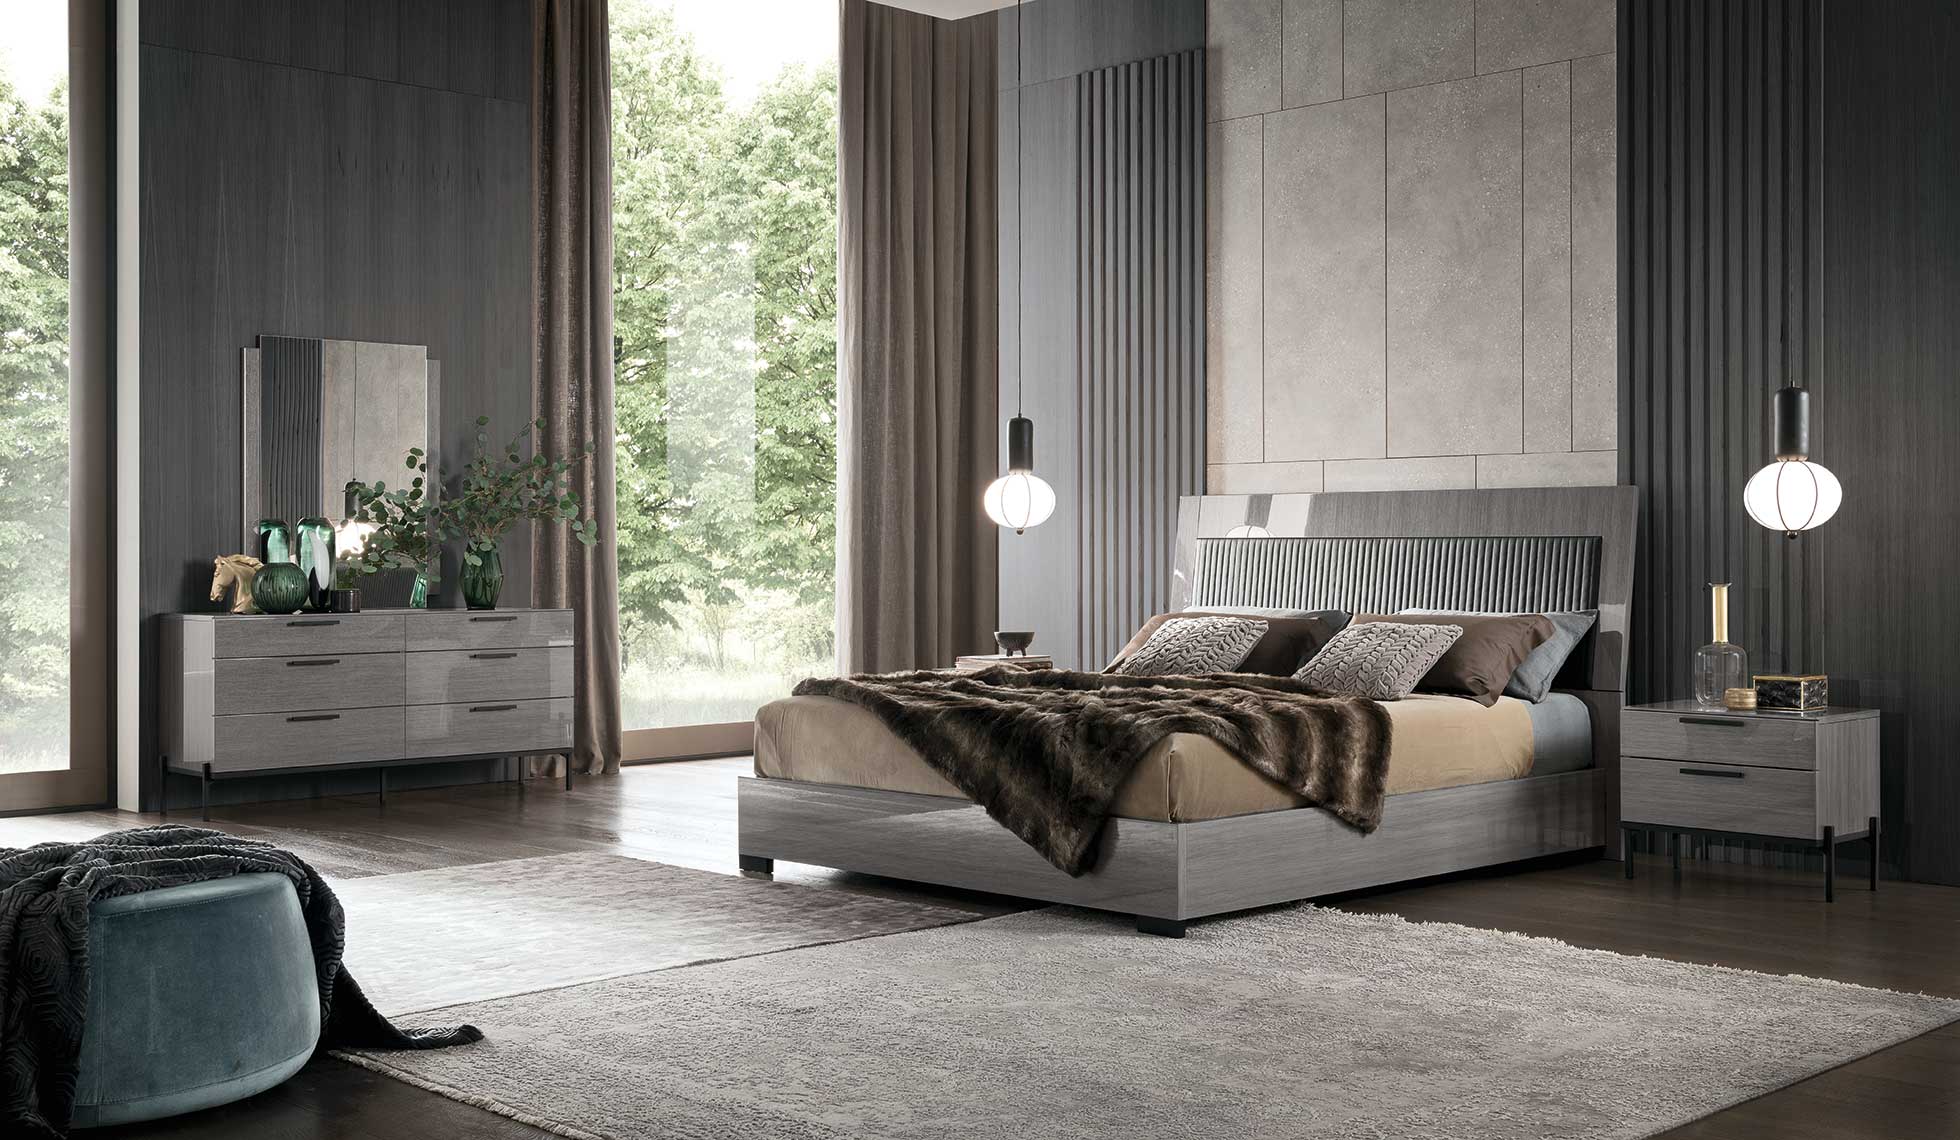 Made in Italy
BED-14